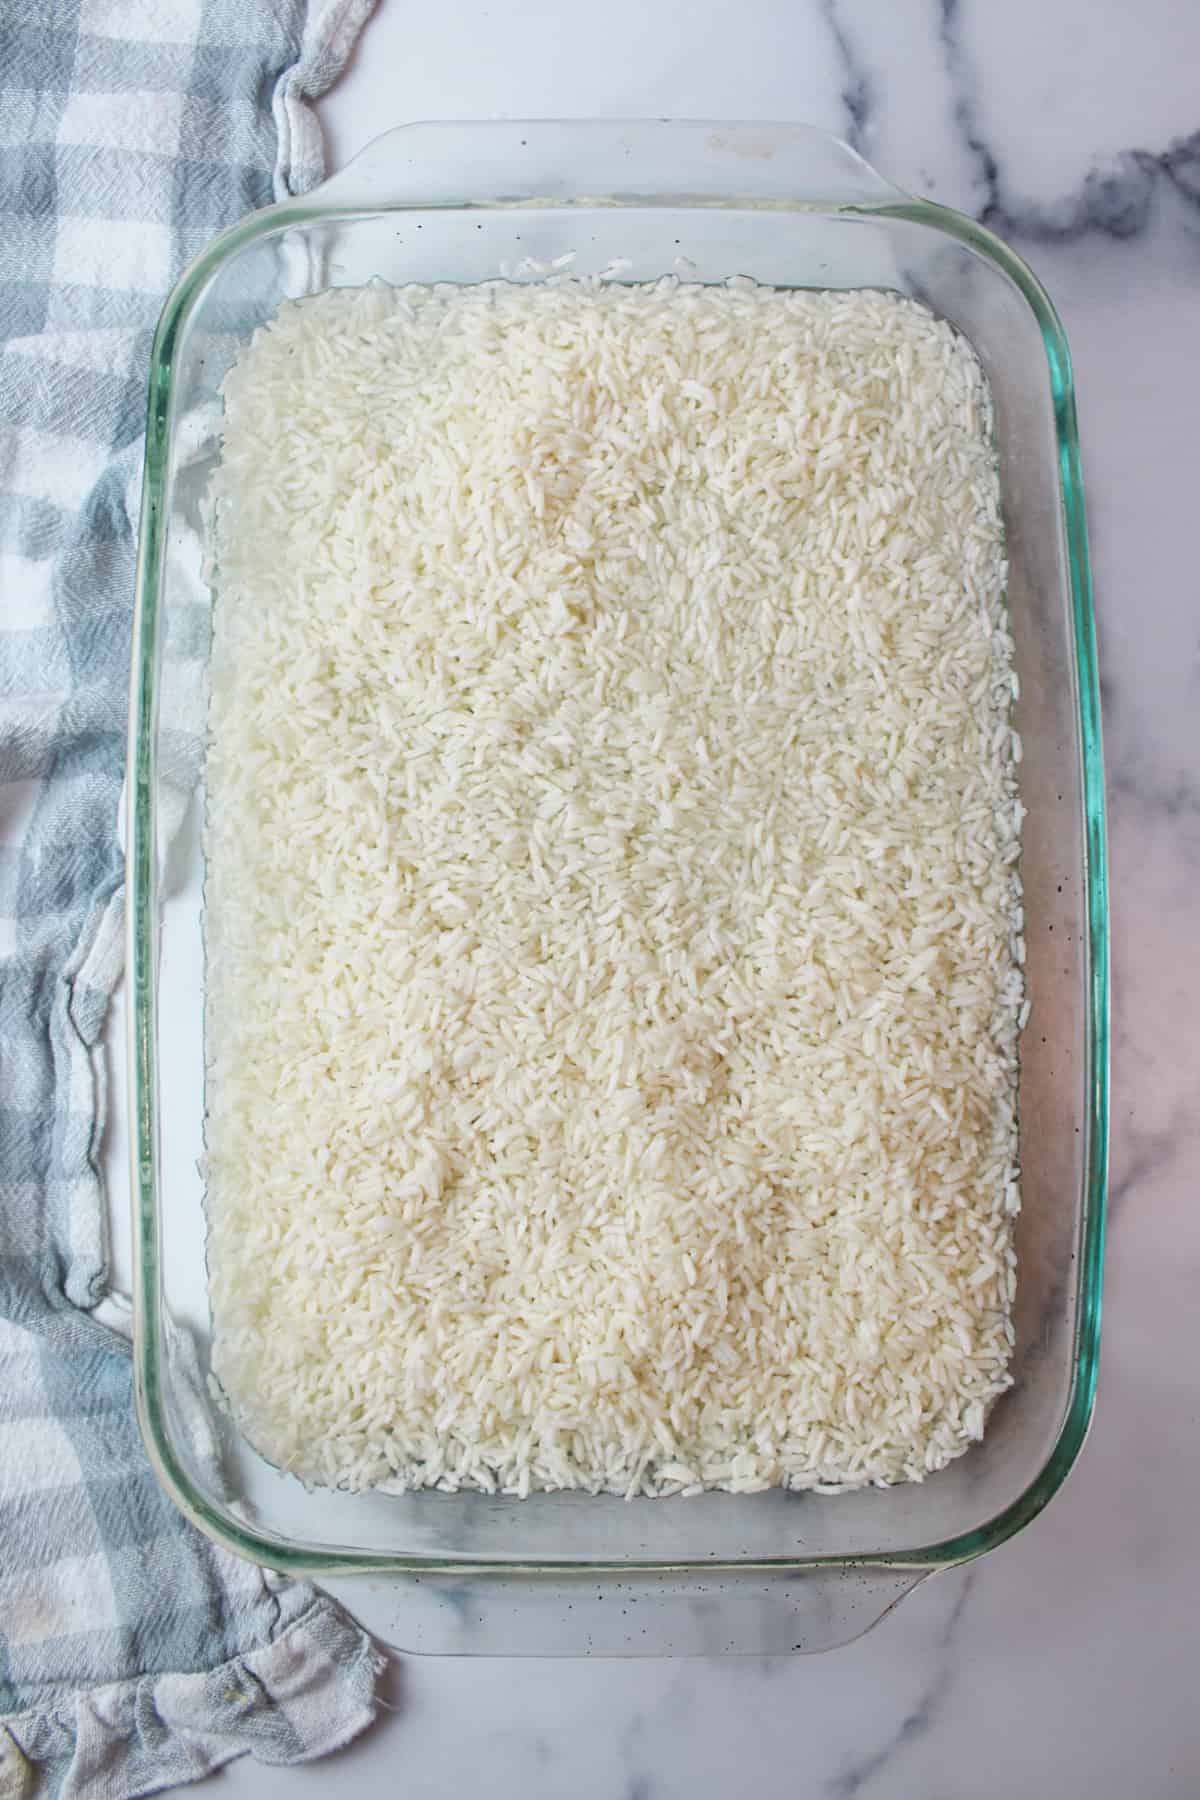 baking dish with white rice inside.